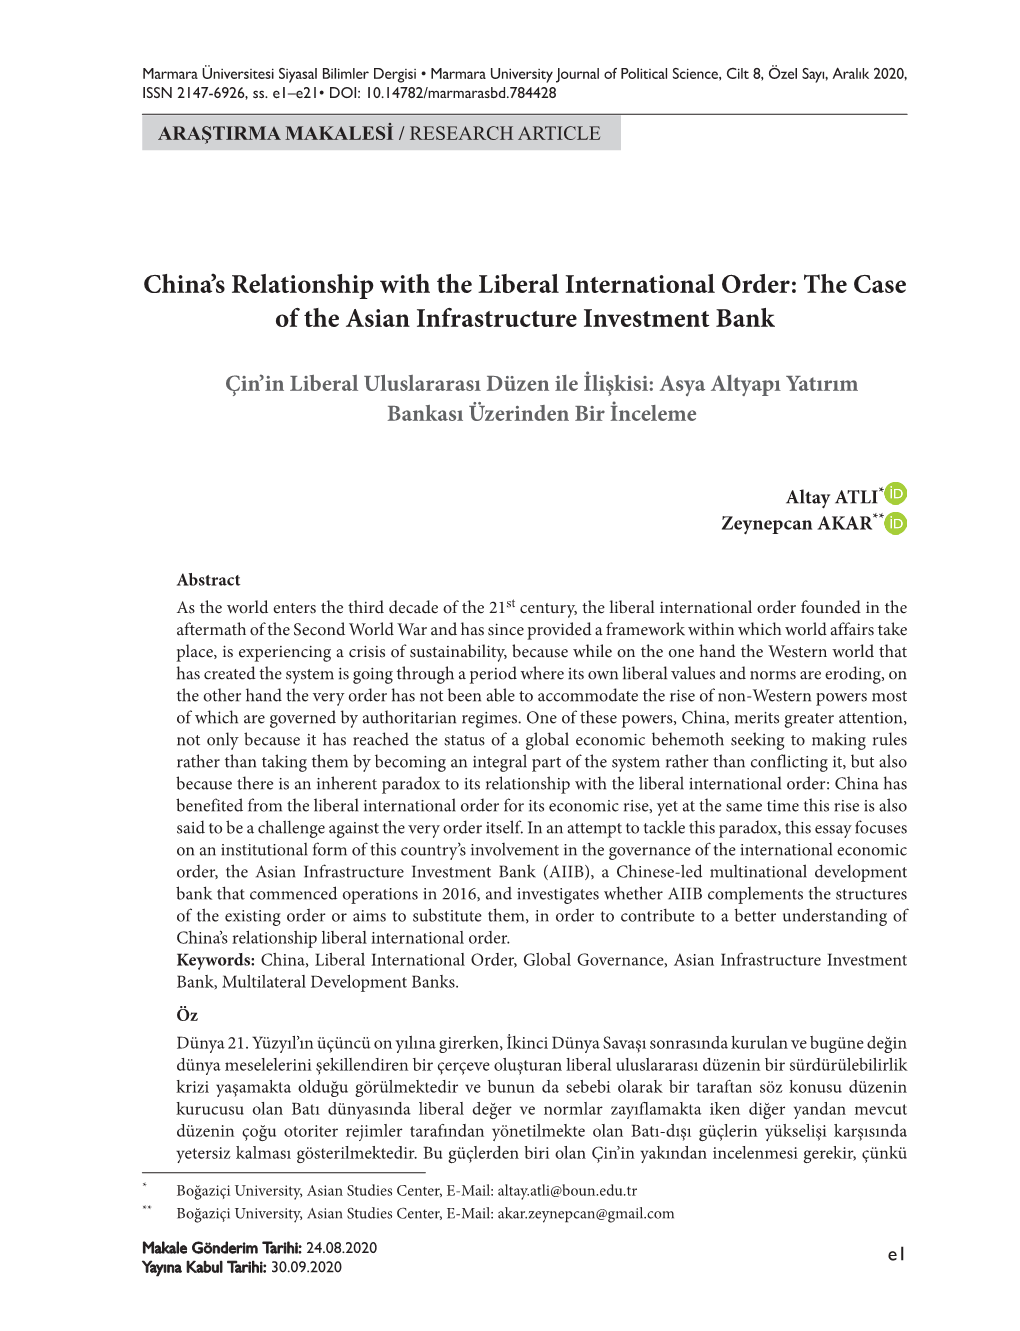 China's Relationship with the Liberal International Order: the Case of The